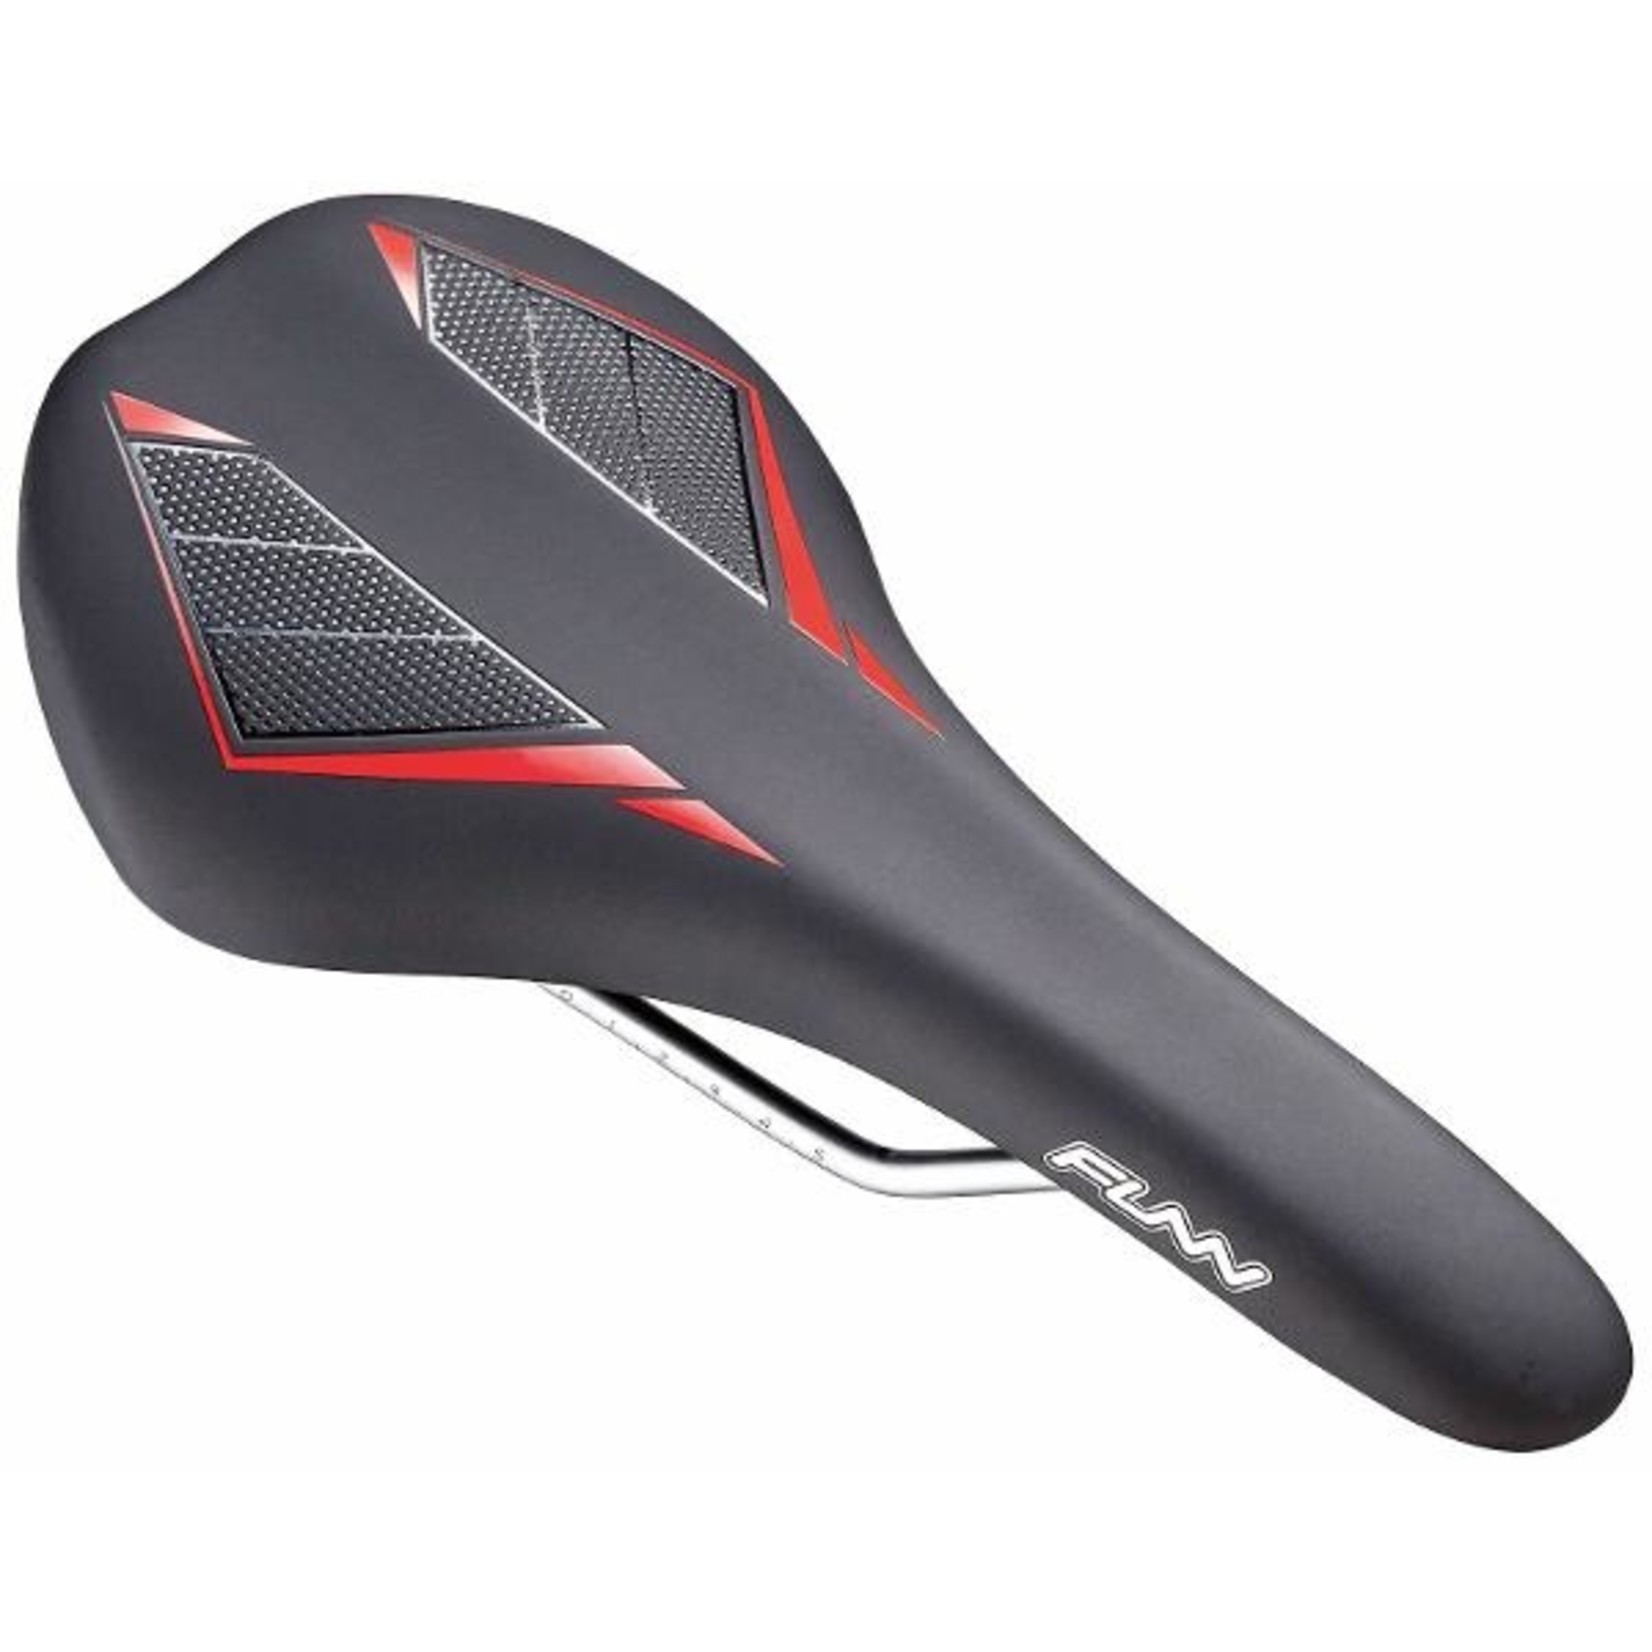 FUNN Funn Bicycle Saddle - Skinny-144mm Wide Water 280mm Long Resistant - Black/ Red